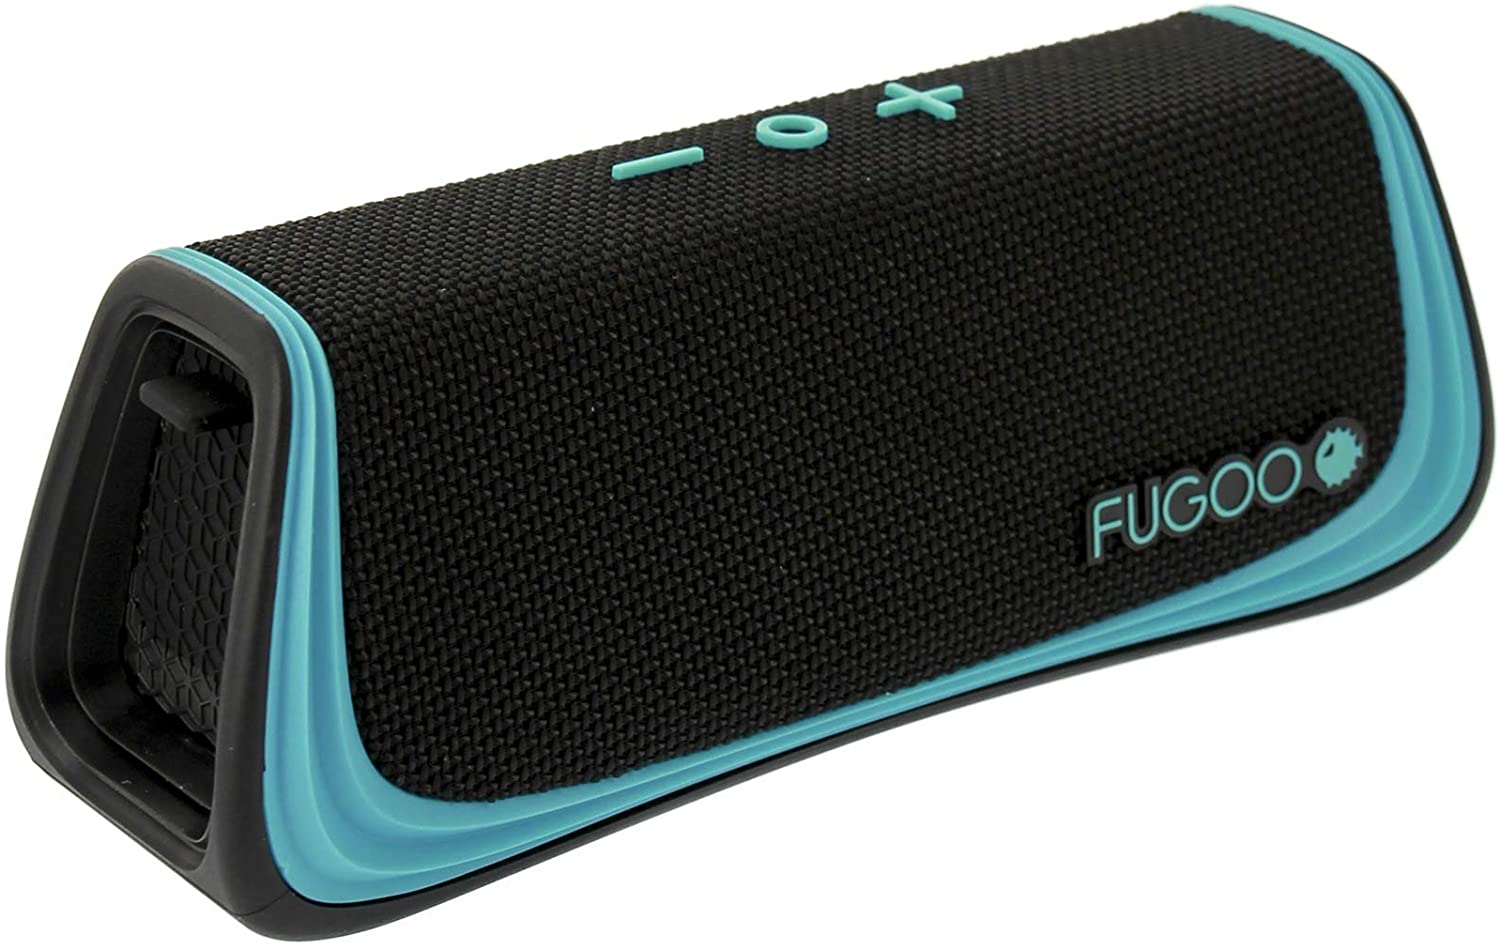 ''FUGOO Sport 2.0 - Portable Bluetooth SPEAKER Waterproof for Outdoor/Indoor Use - Wireless Stereo Pa